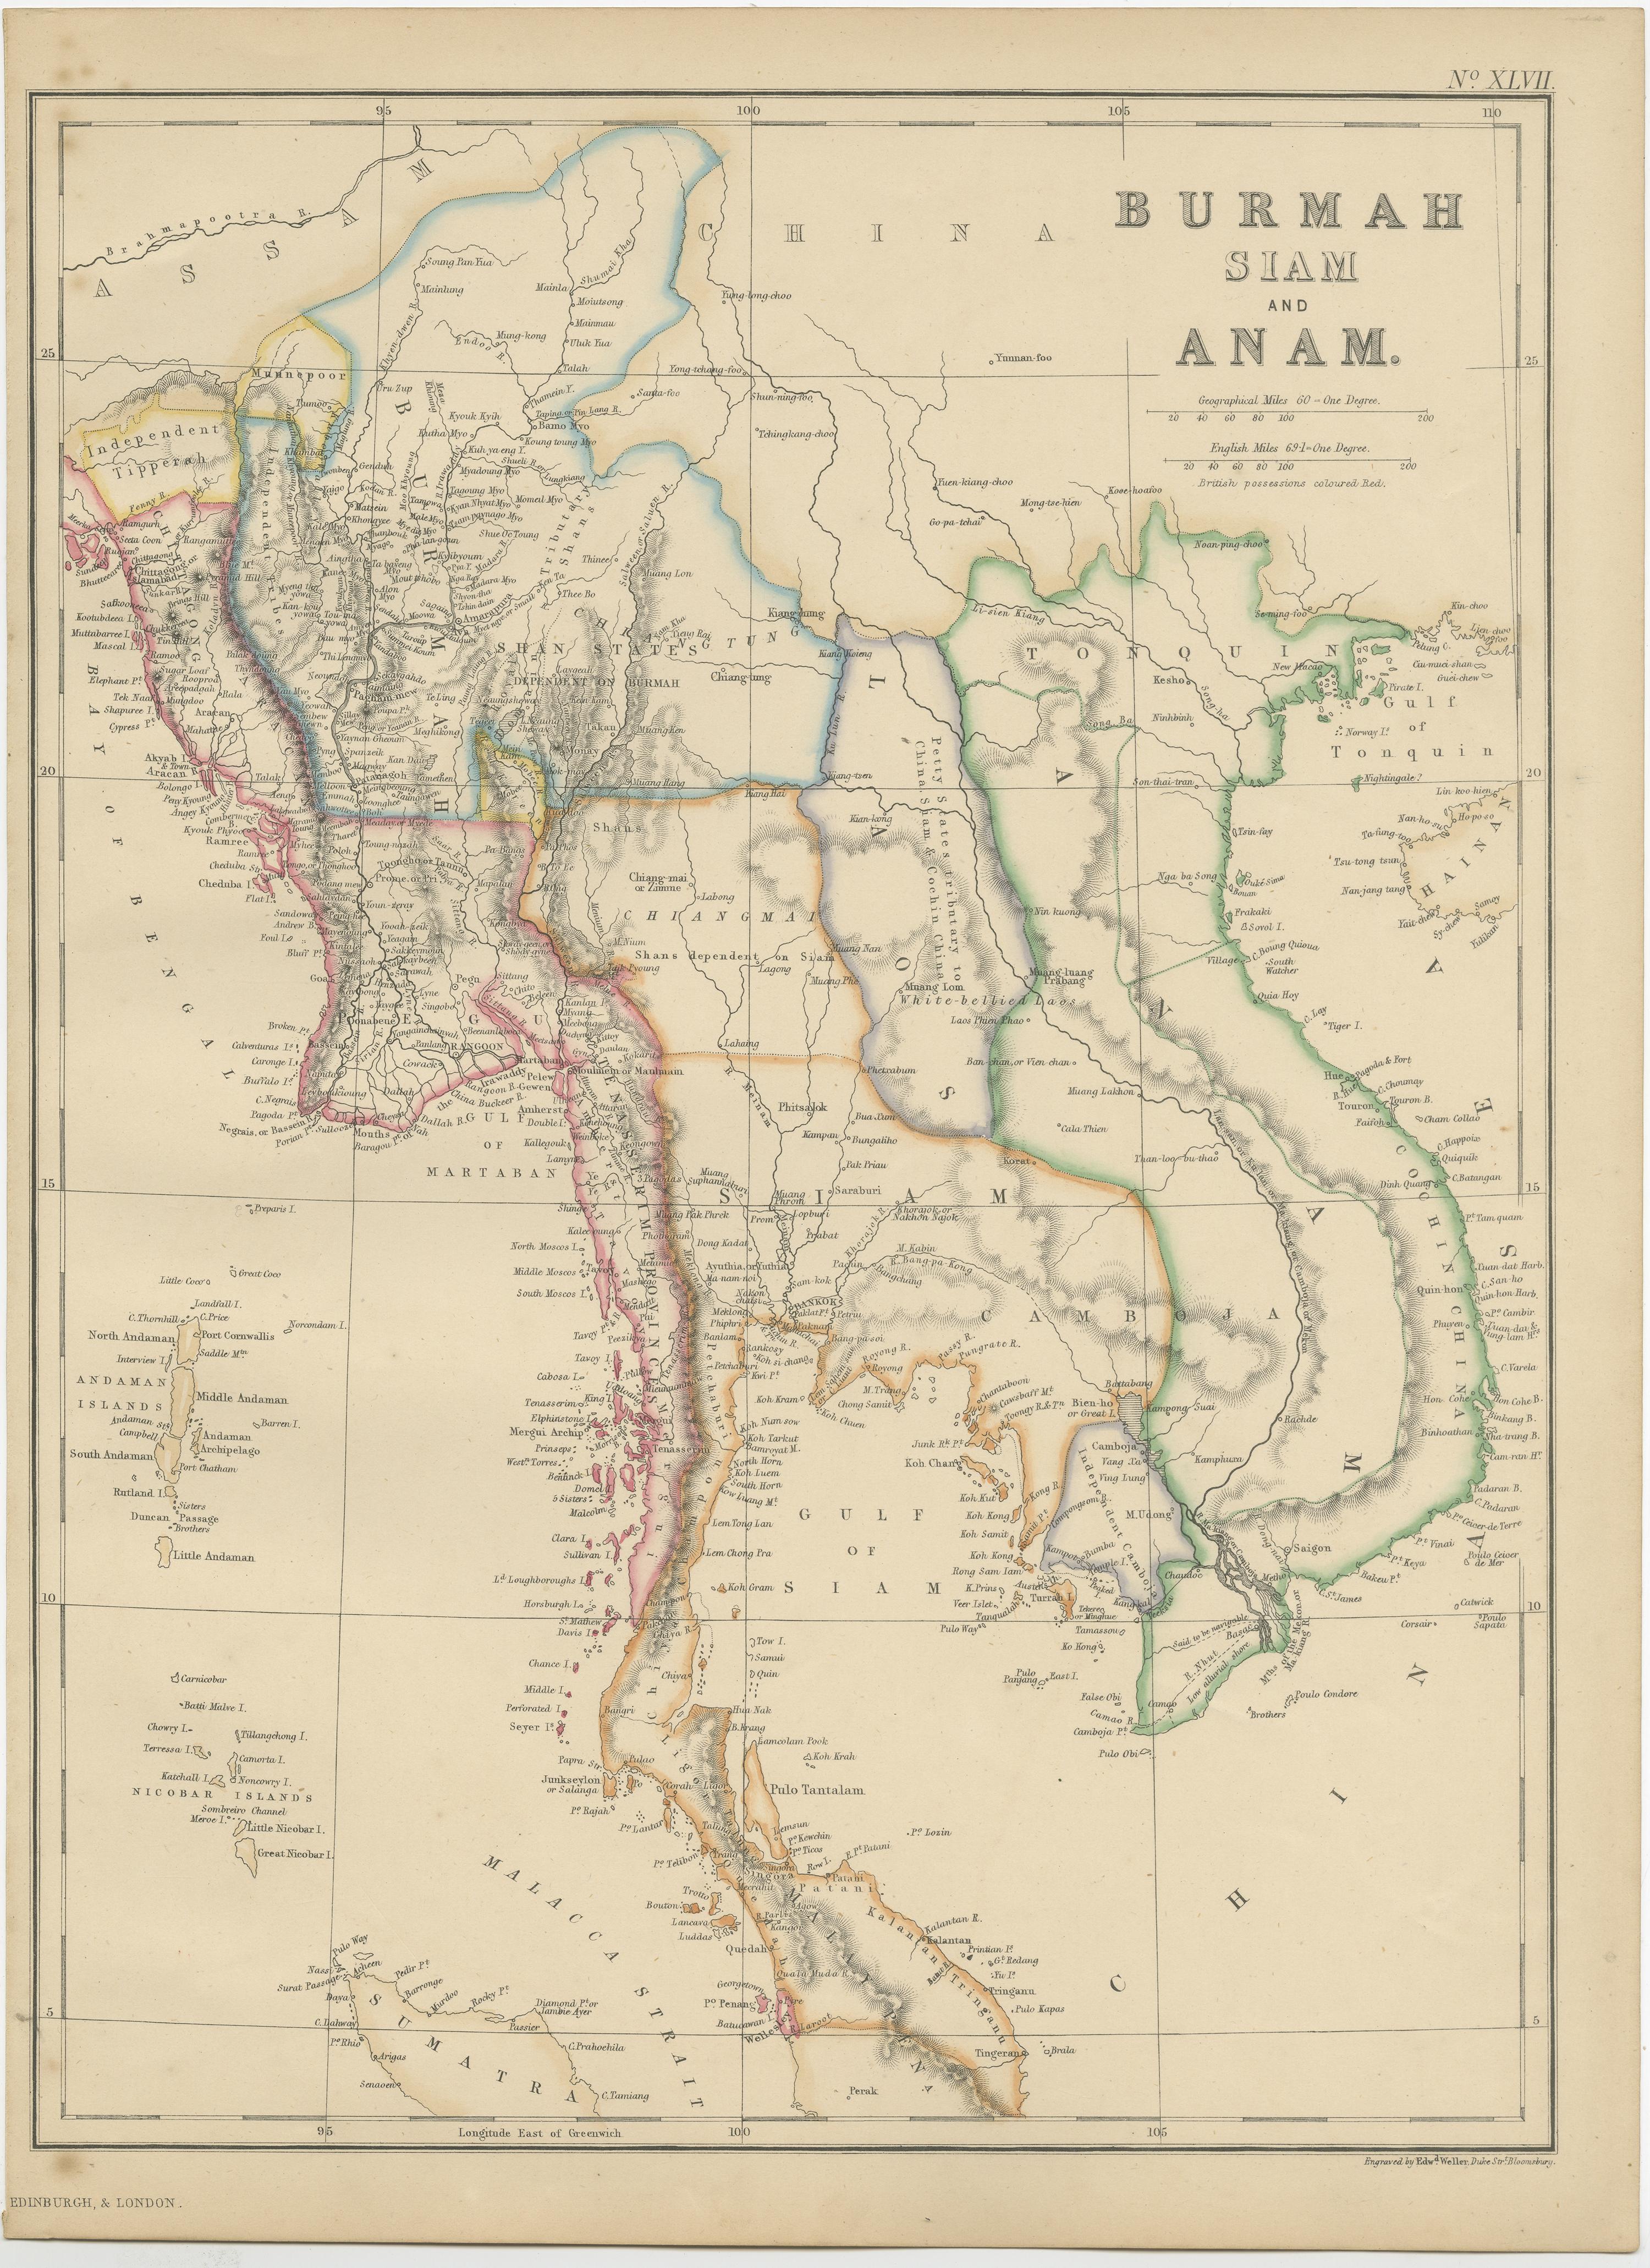 Antique map titled 'Burmah, Siam and Anam'. Original antique map of Myanmar (Burma), Thailand (Siam) and Annam (Anam). This map originates from ‘The Imperial Atlas of Modern Geography’. Published by W. G. Blackie, 1859.